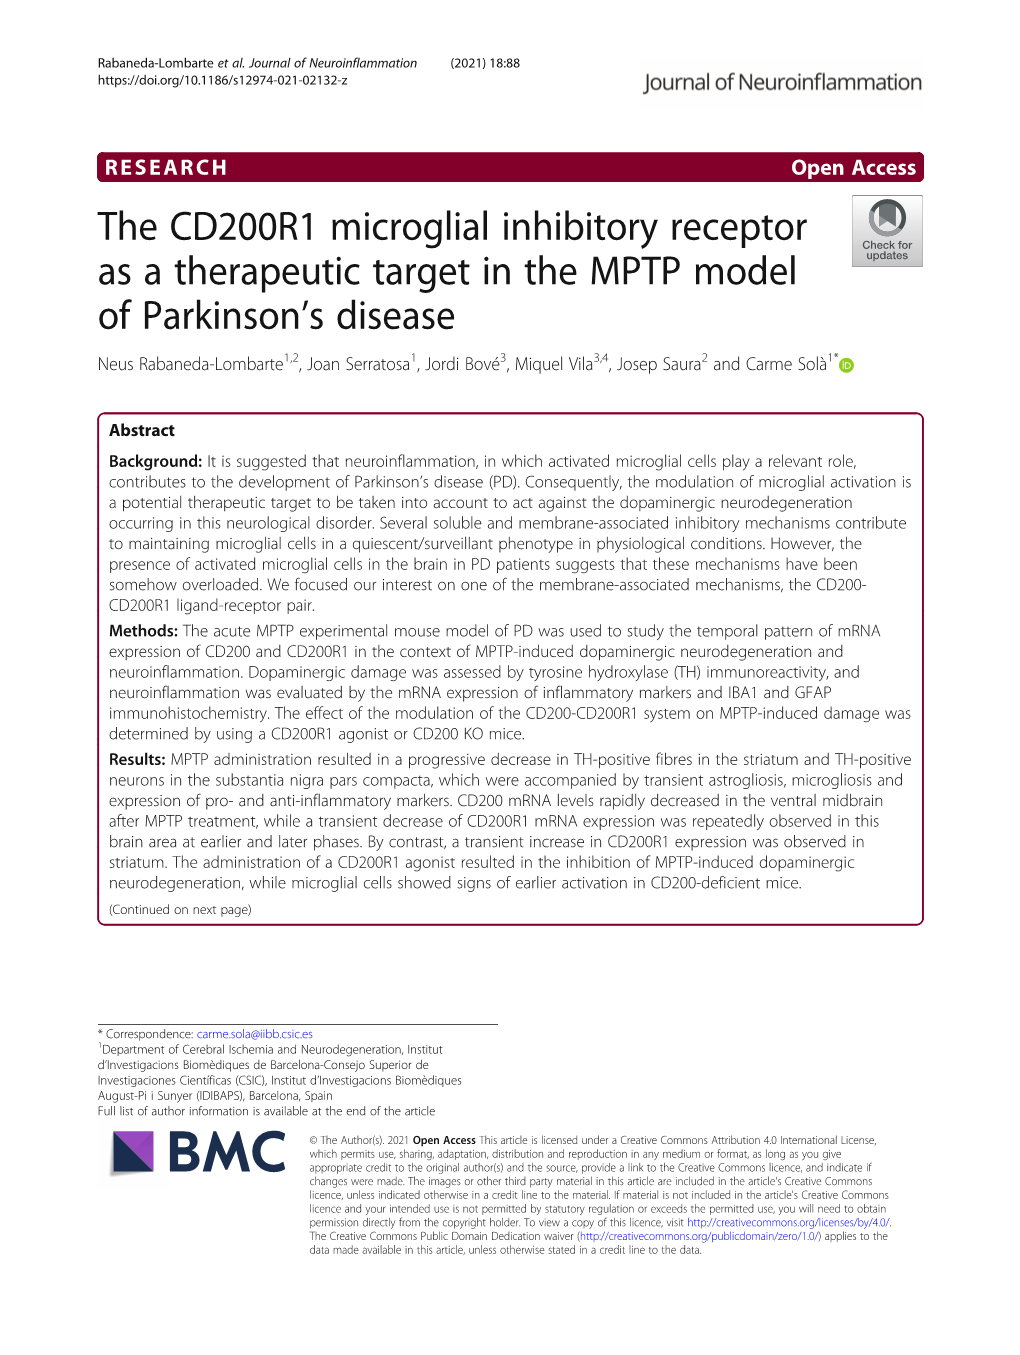 The CD200R1 Microglial Inhibitory Receptor As a Therapeutic Target In